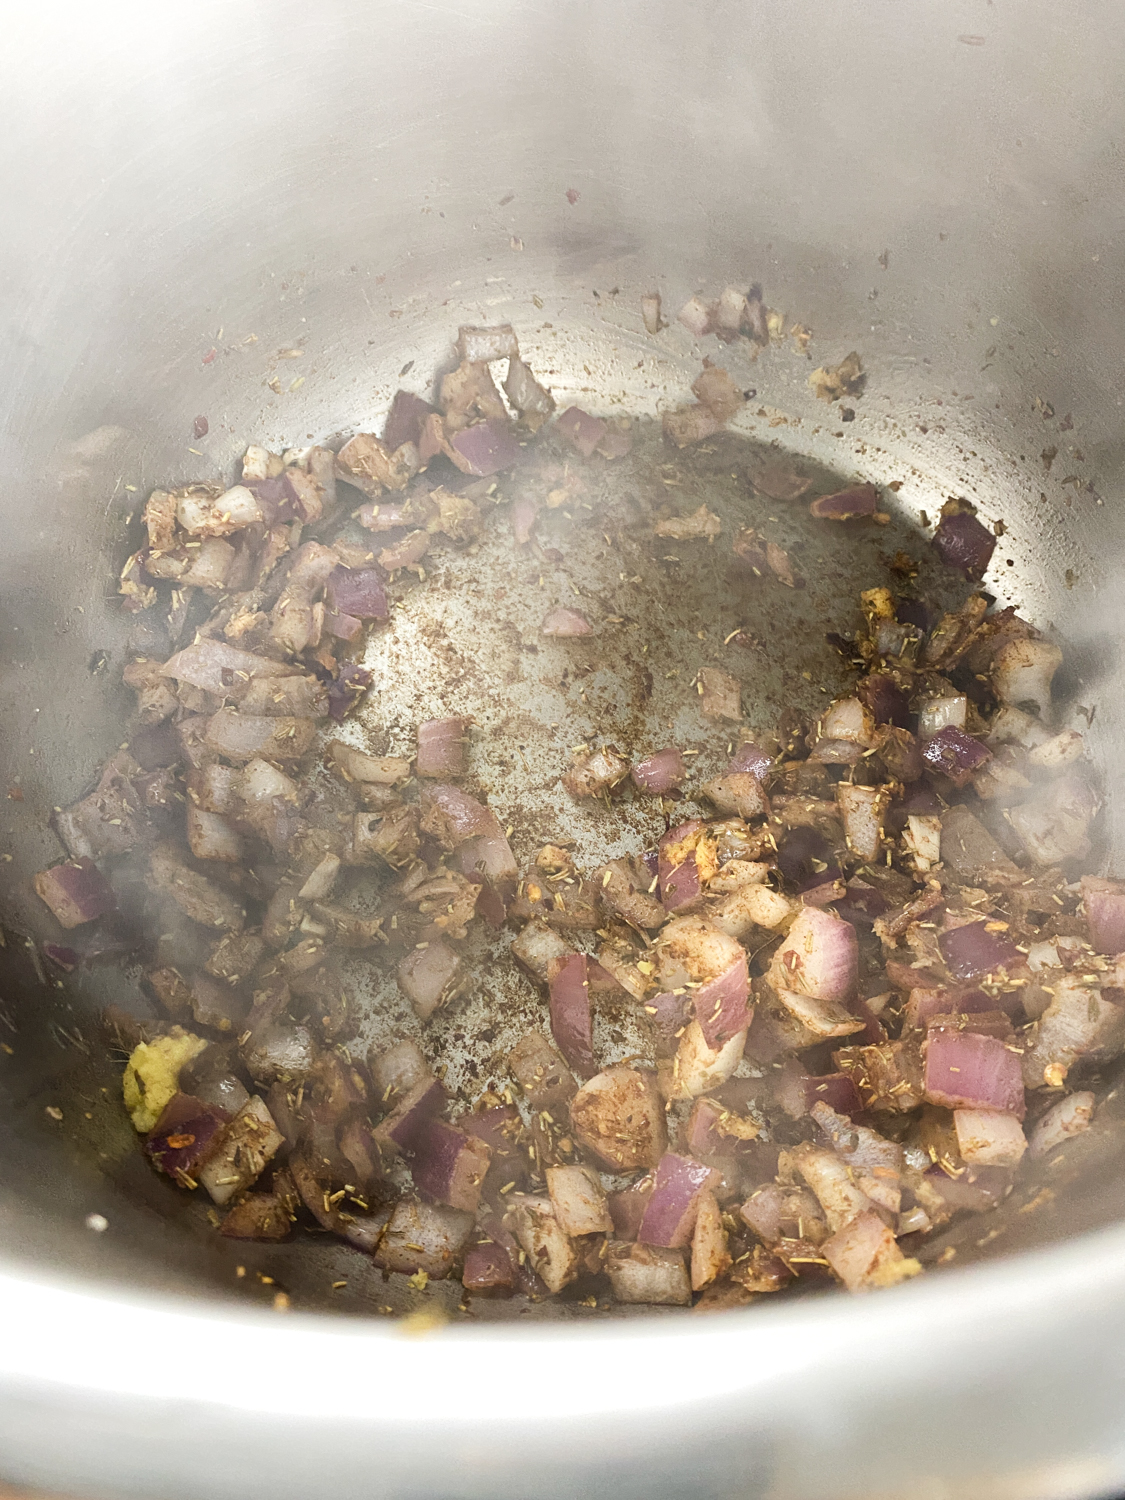 Stir to combine, then simmer for 3 to 4 minutes, stirring regularly, until the mixture is well-browned and the spices are fragrant.